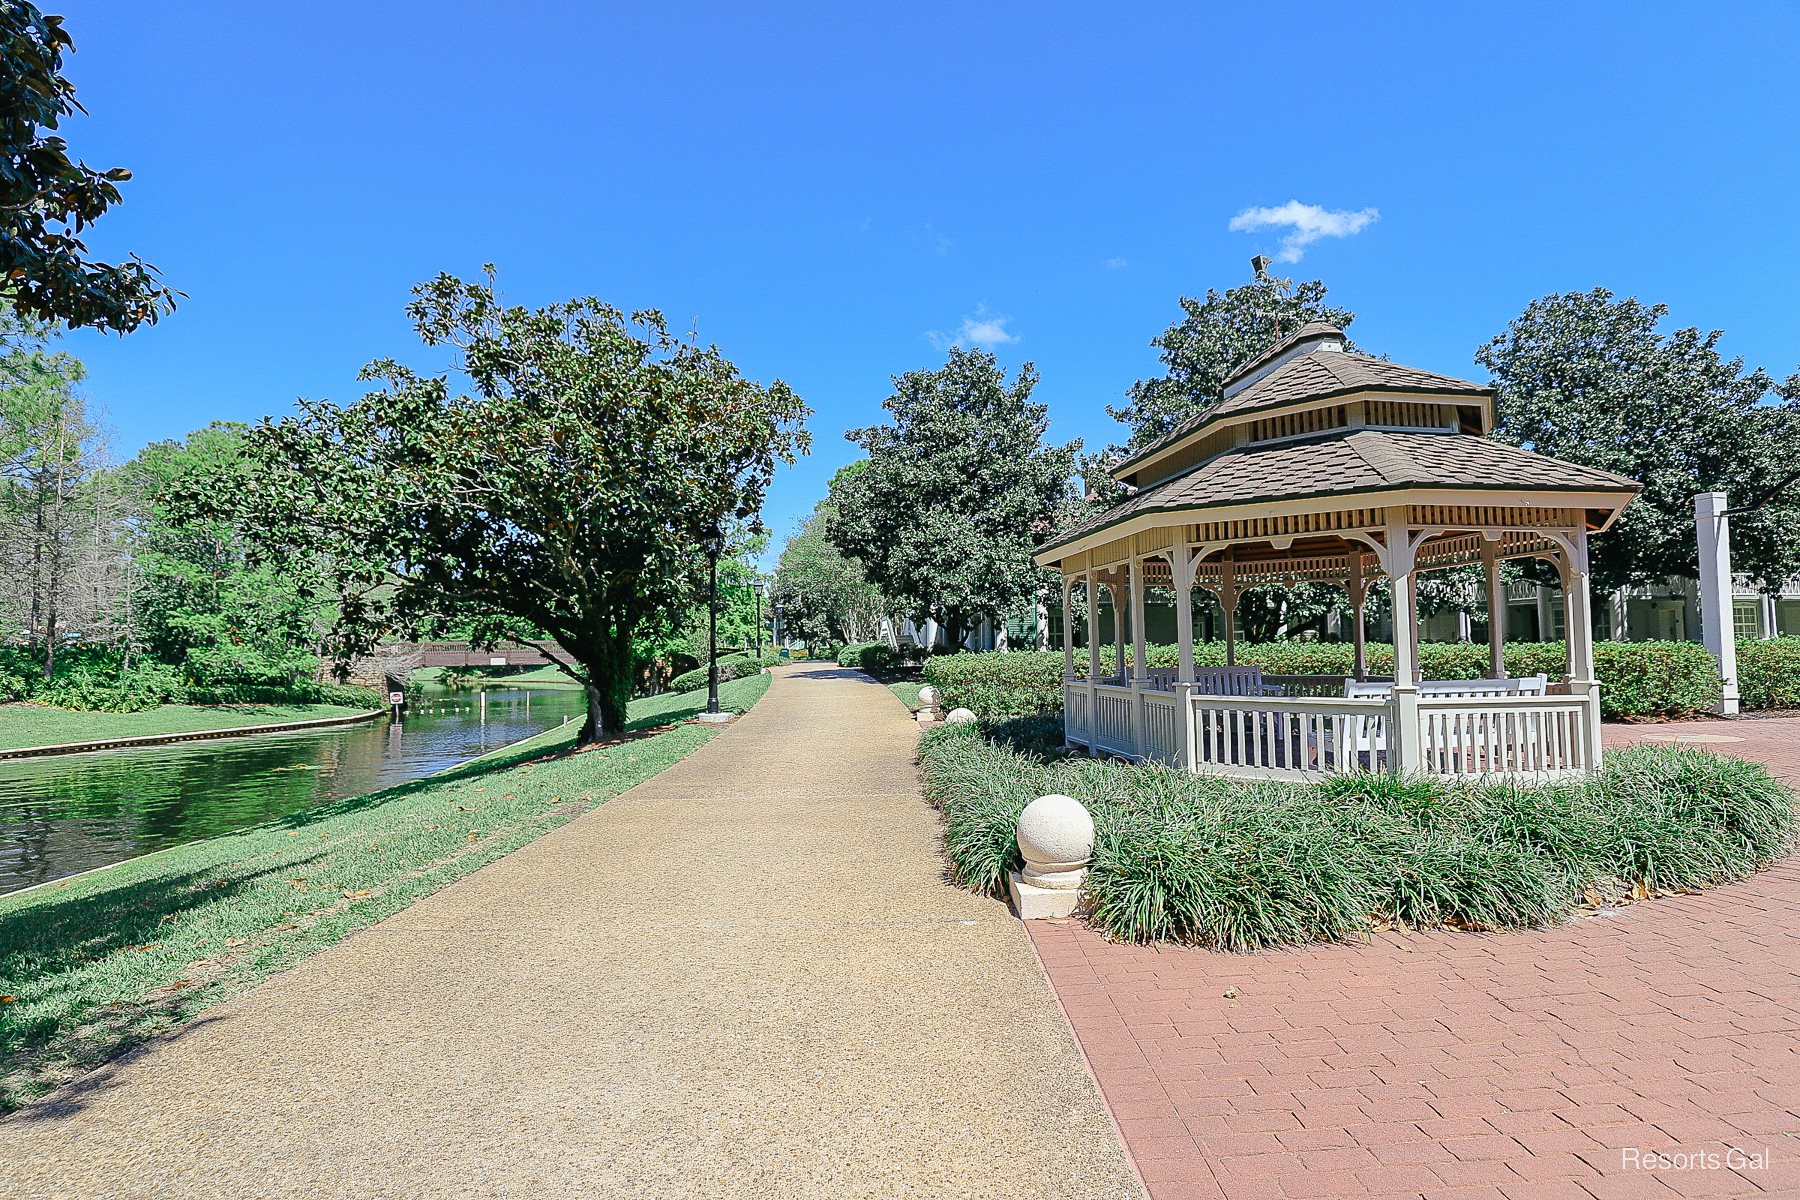 a sidewalk with a gazebo to the right side 